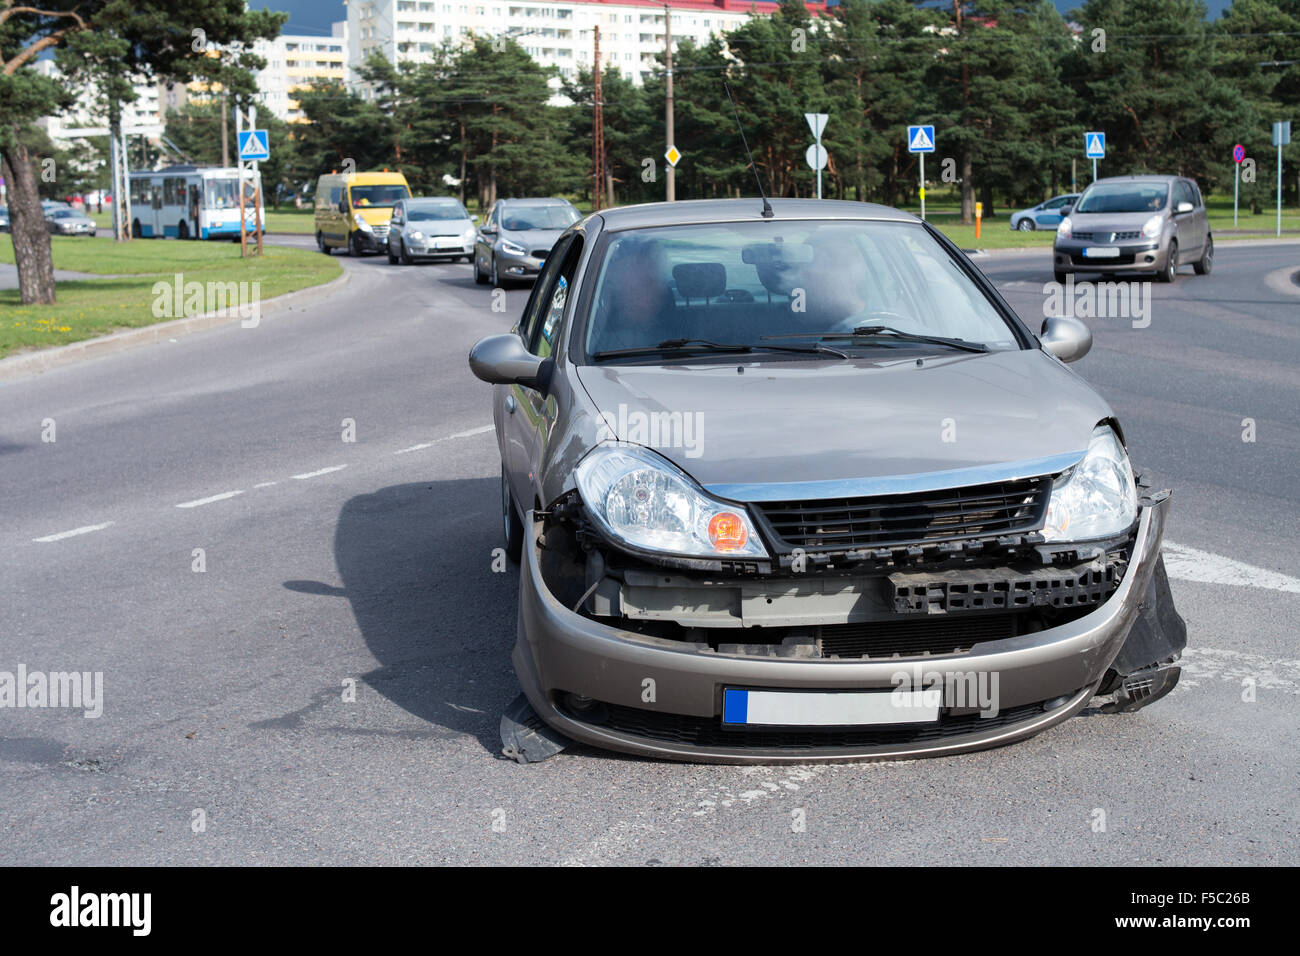 Car Crash - front view of a car with some visible damage Stock Photo